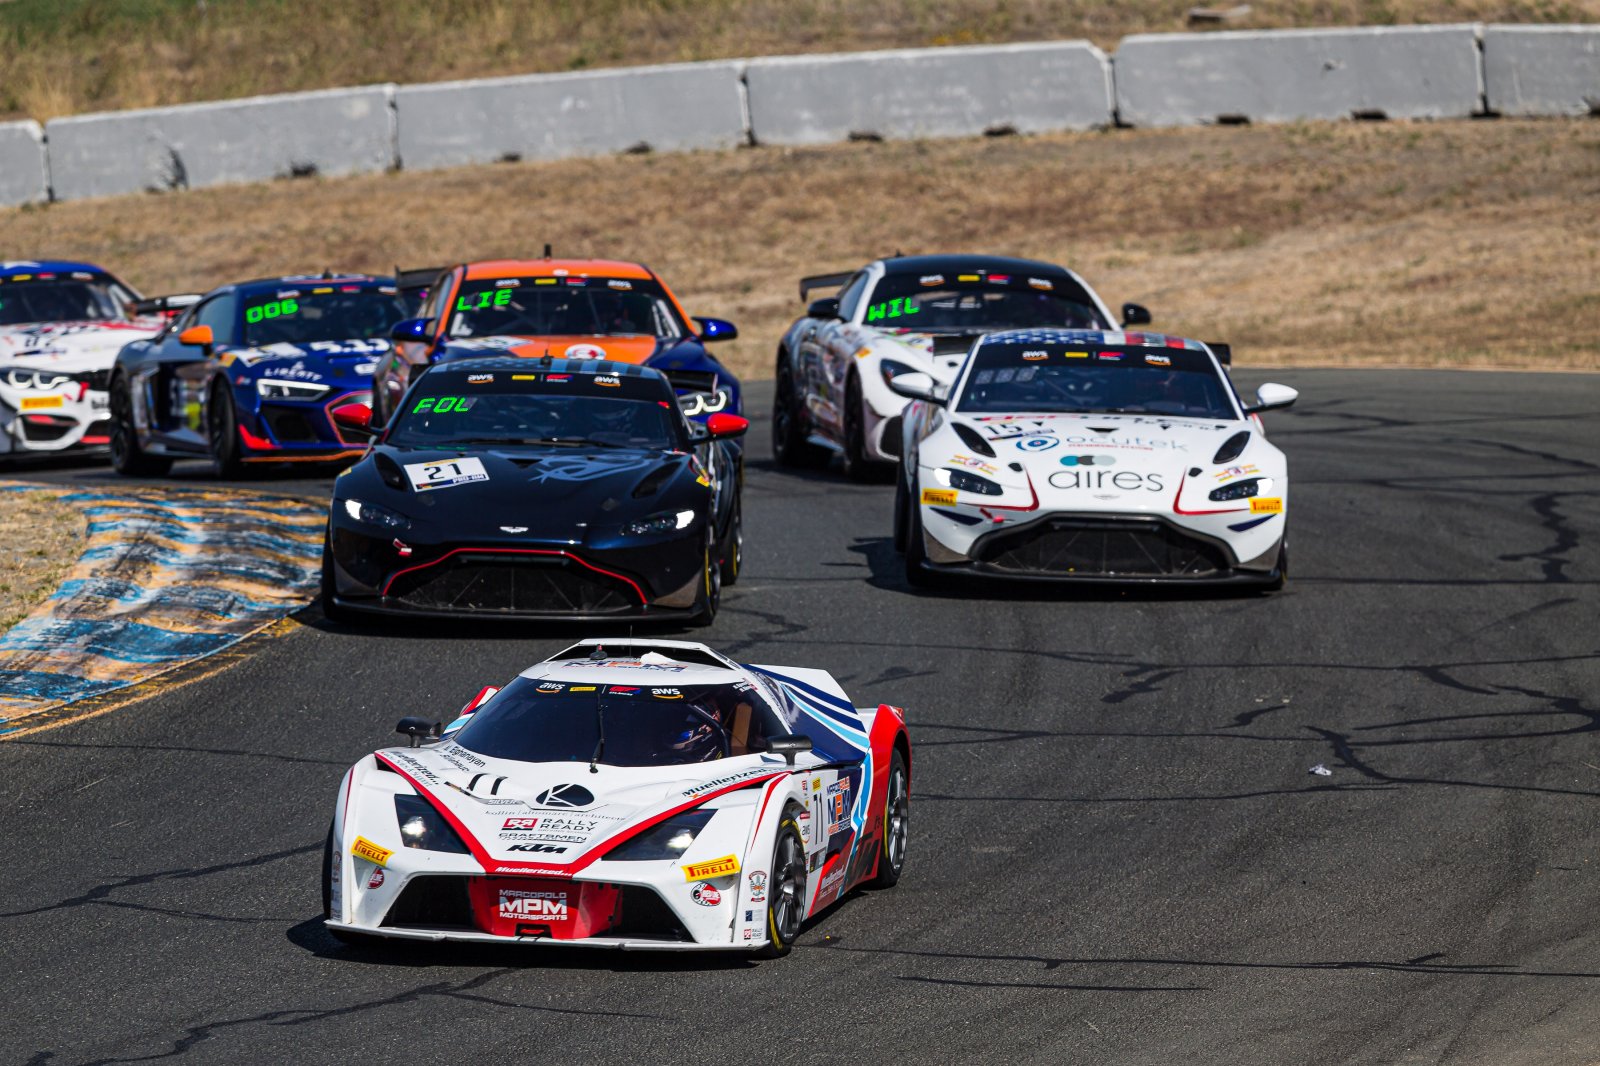 Marco Polo Motorsports Clinches Maiden SprintX Victory at Sonoma Raceway